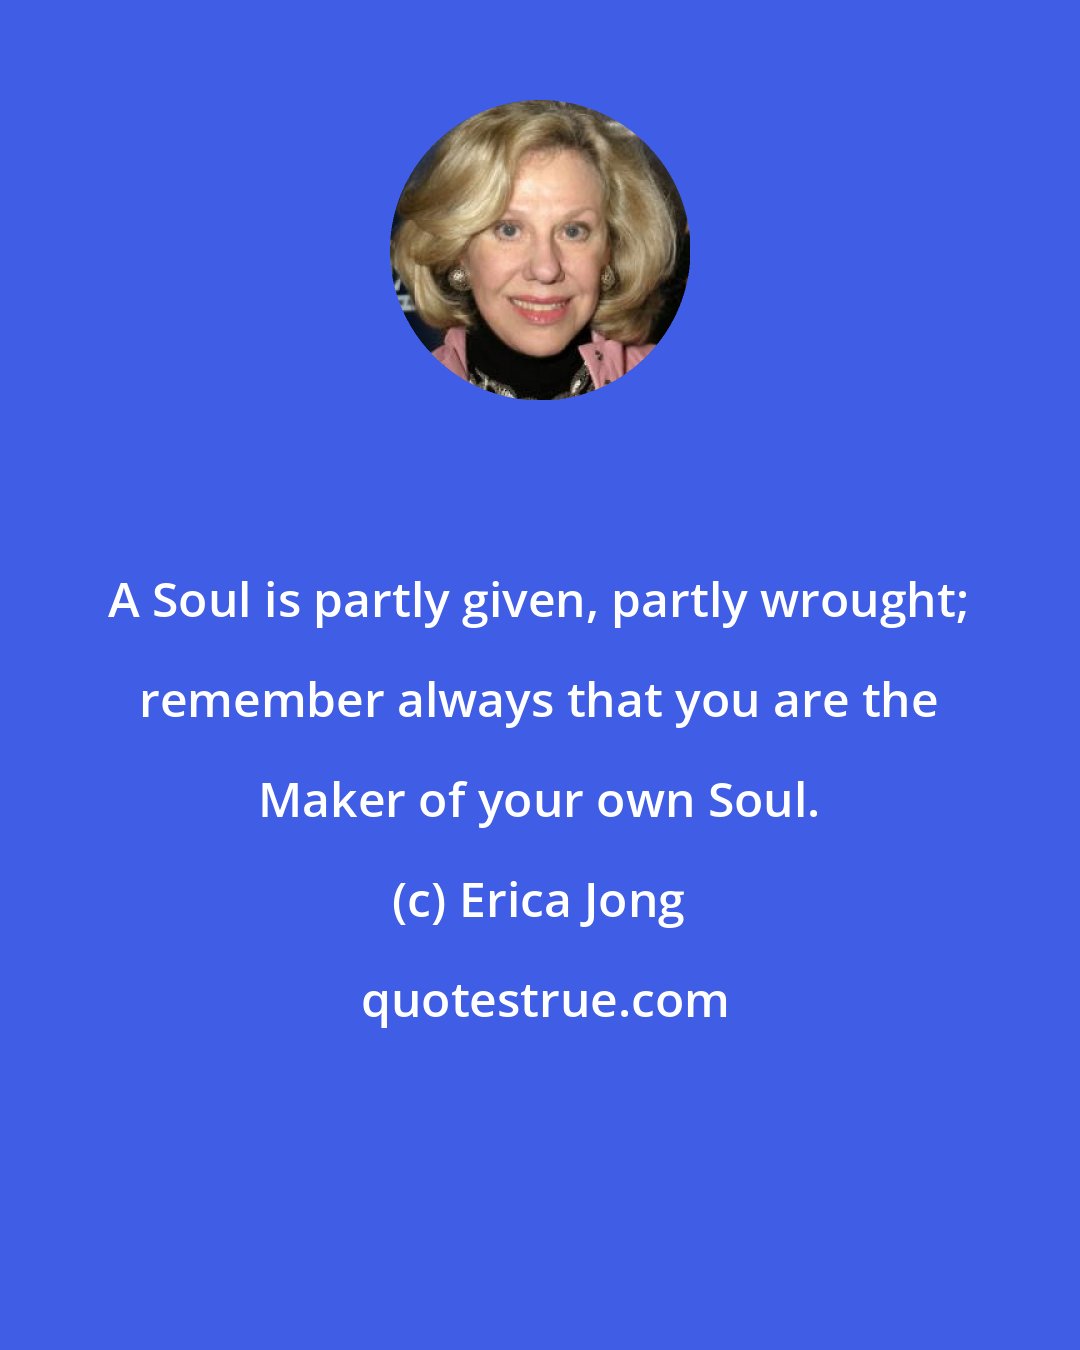 Erica Jong: A Soul is partly given, partly wrought; remember always that you are the Maker of your own Soul.